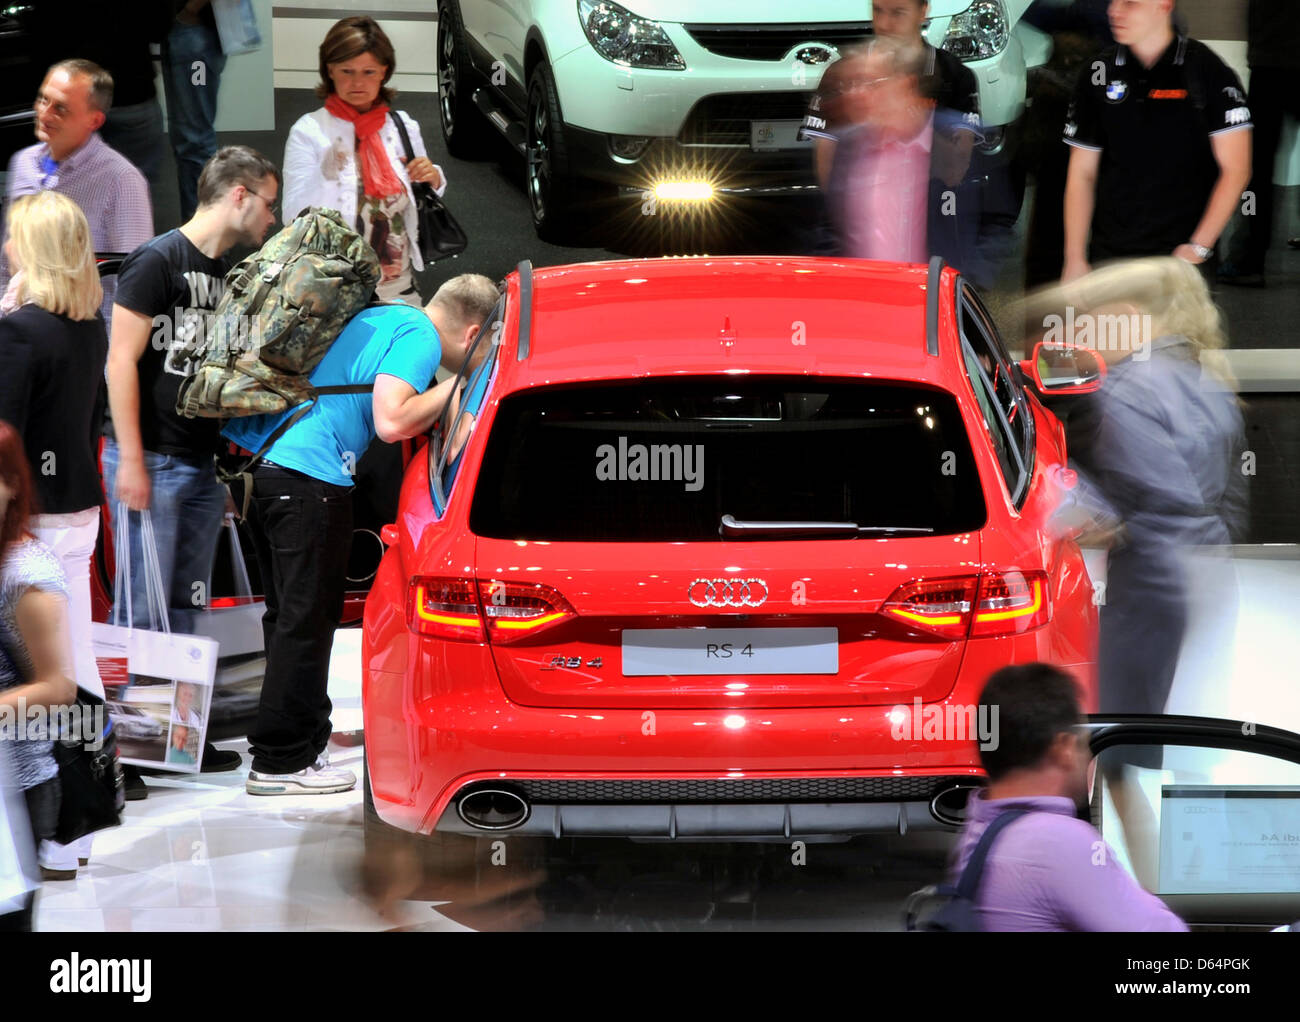 Visitors stroll around exhibited cars and motor vehicles of car manufacturer Audi at the automobile fair AMI in Leipzig, Germany, 2 January 2012. German and international car manufacturers present their latest car novelties at the Leipzig trade fair centre from 2 June to 10 June 2012. Around 280,000 visitors are expeocted to attend the fair which features up to 450 exhibitors. Phot Stock Photo